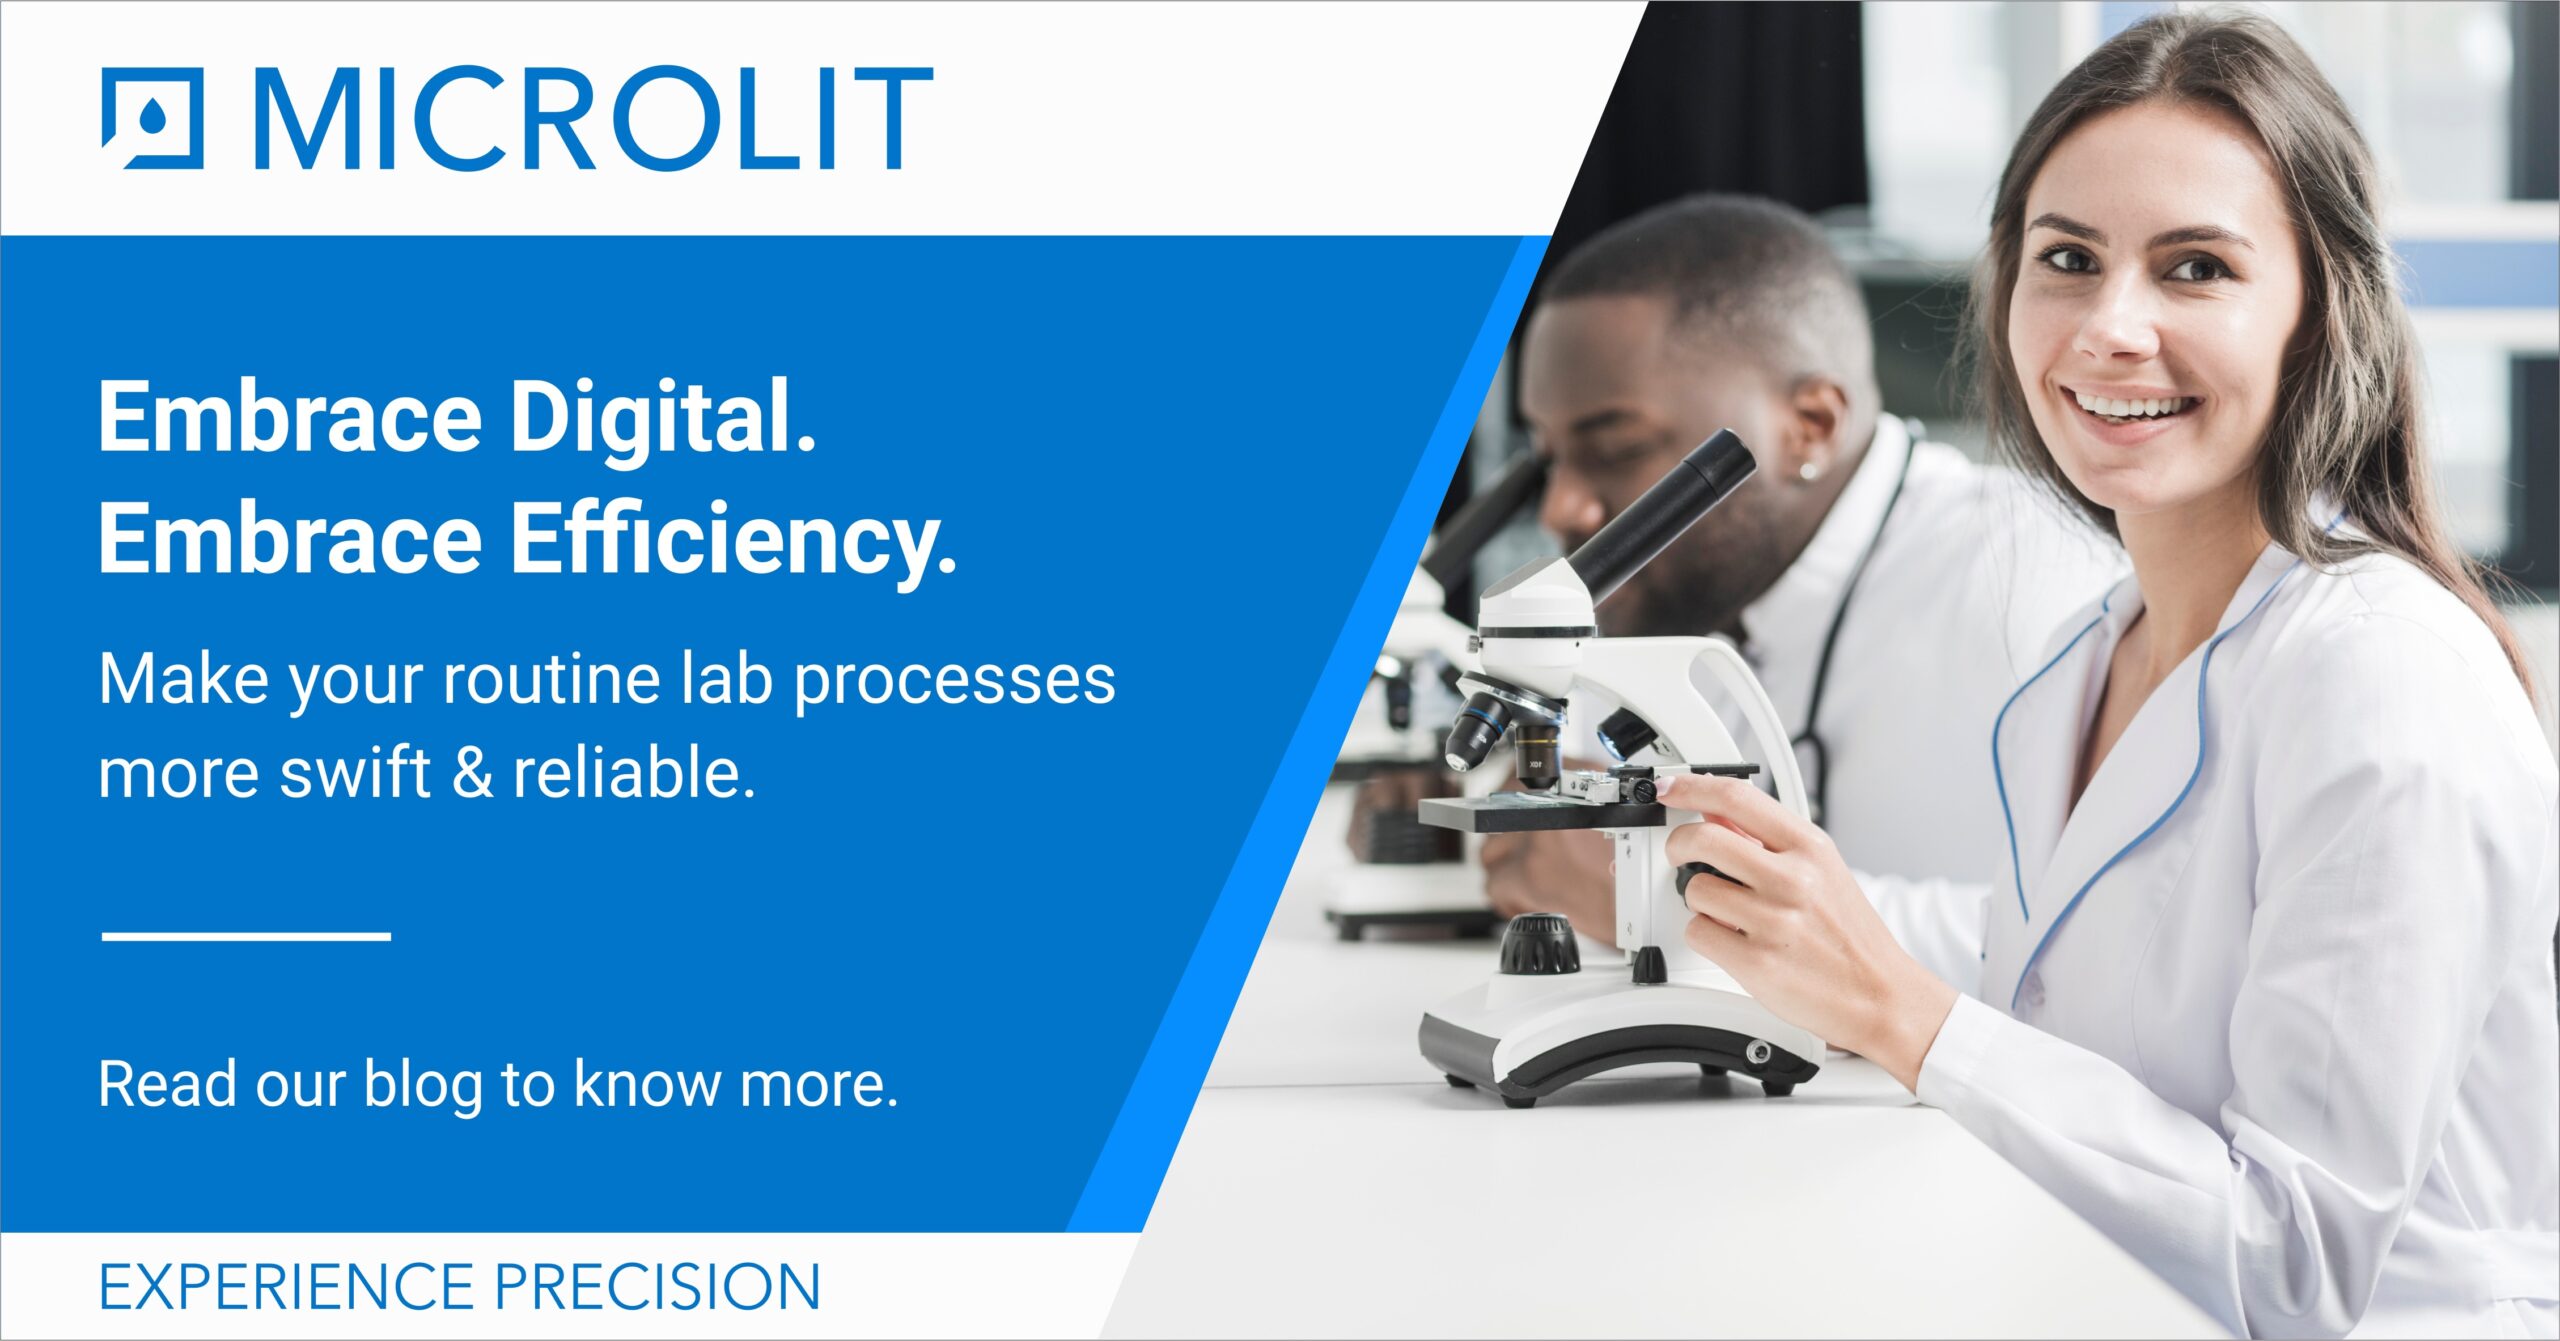 Go Digital to Accelerate Your Efficiency